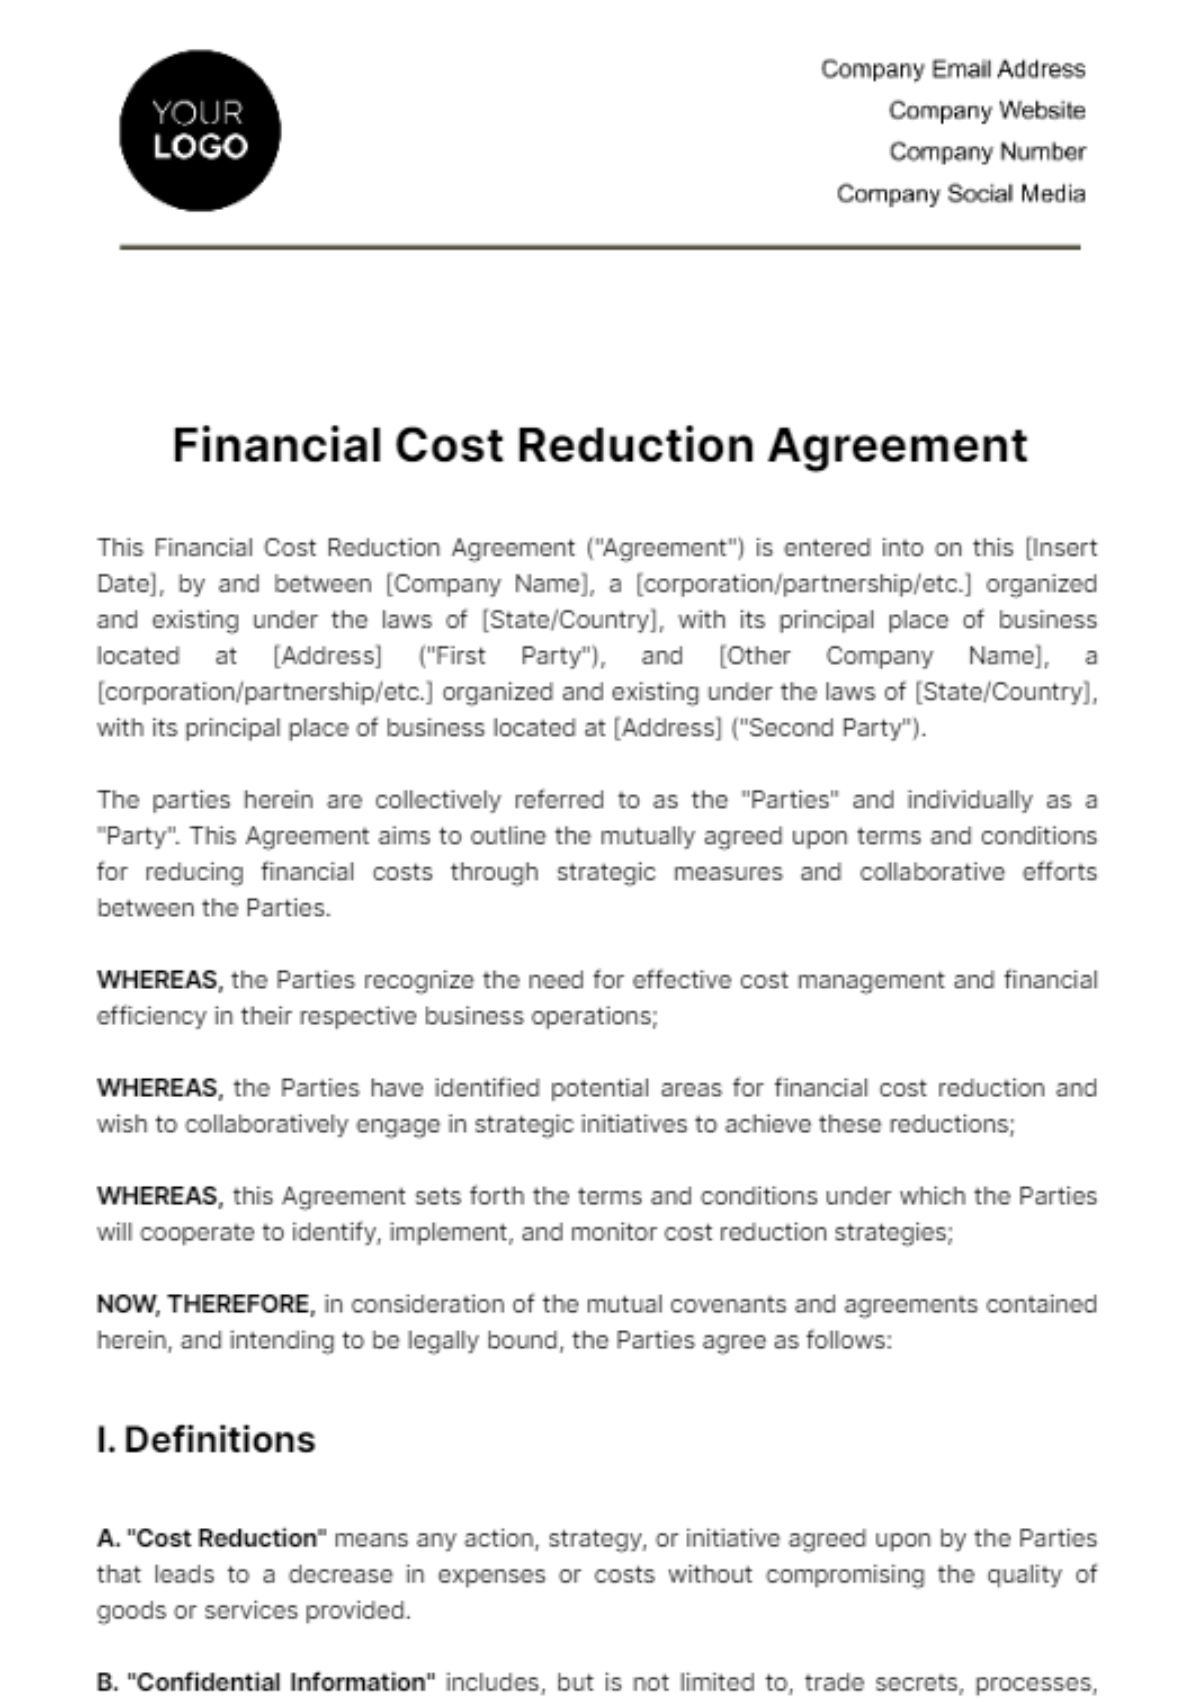 Financial Cost Reduction Agreement Template